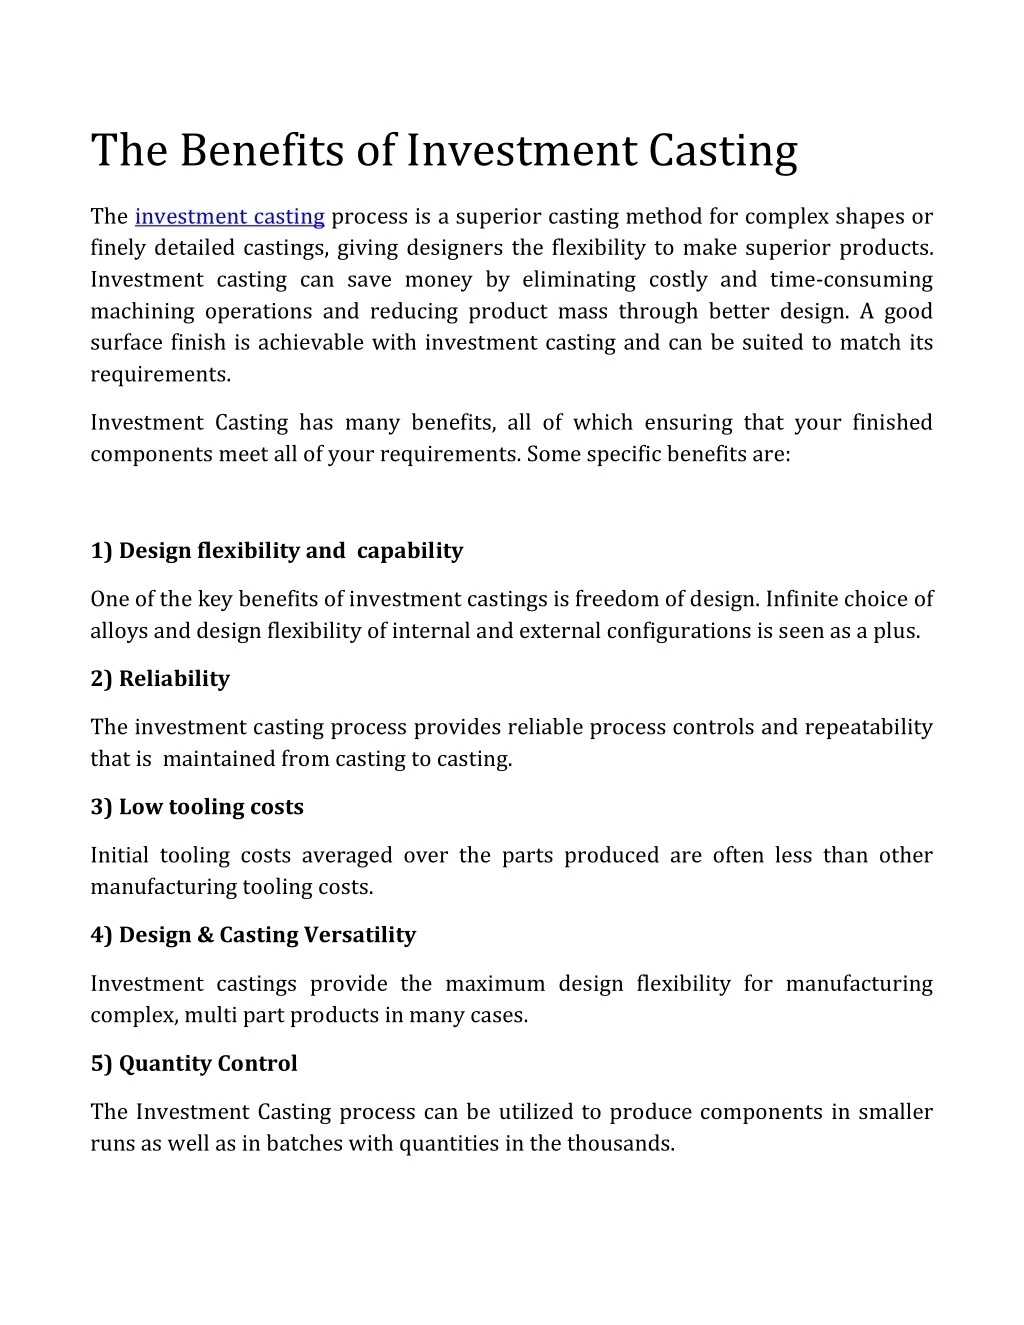 the benefits of investment casting